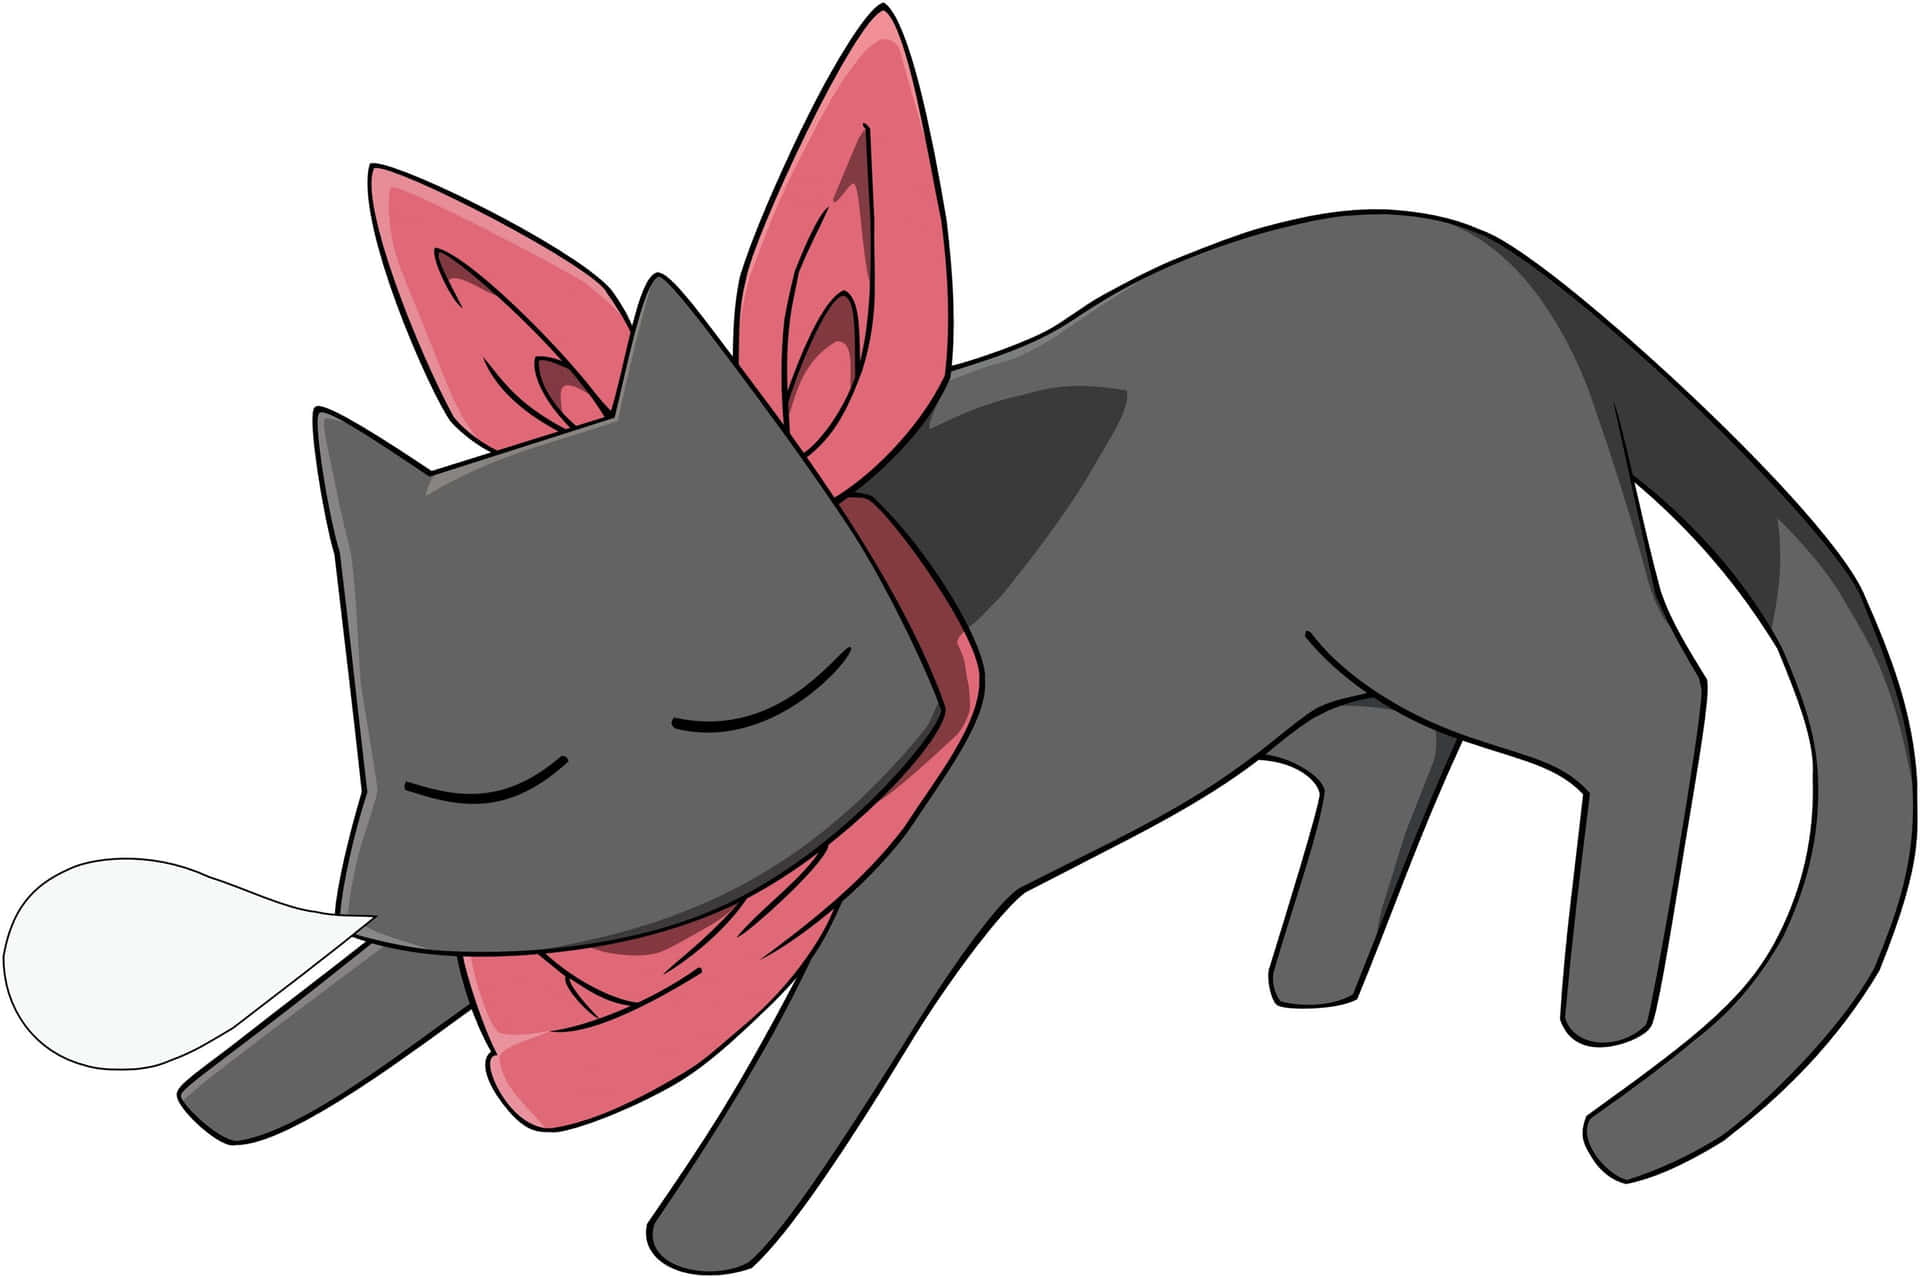 "A cheerful anime cat showing off her cute side in a pink bowtie"